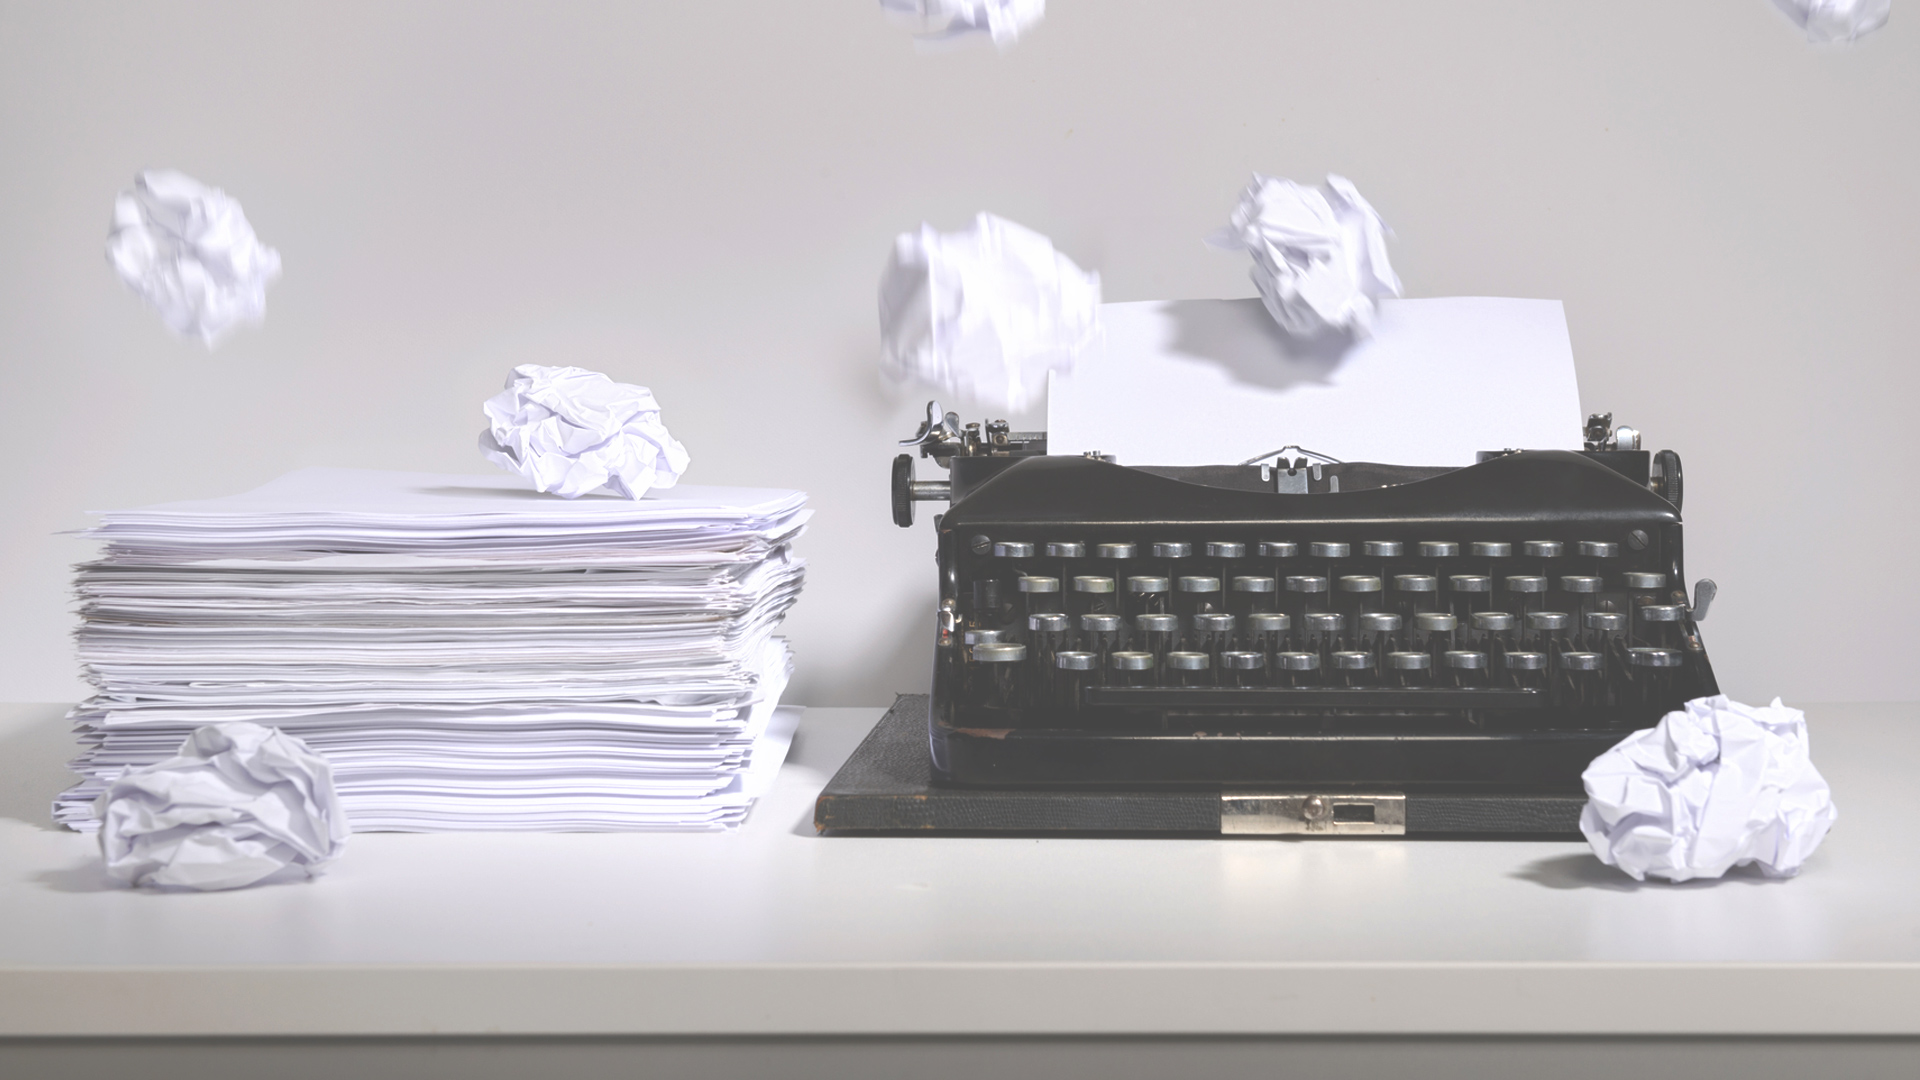 typewriter and sheets of paper